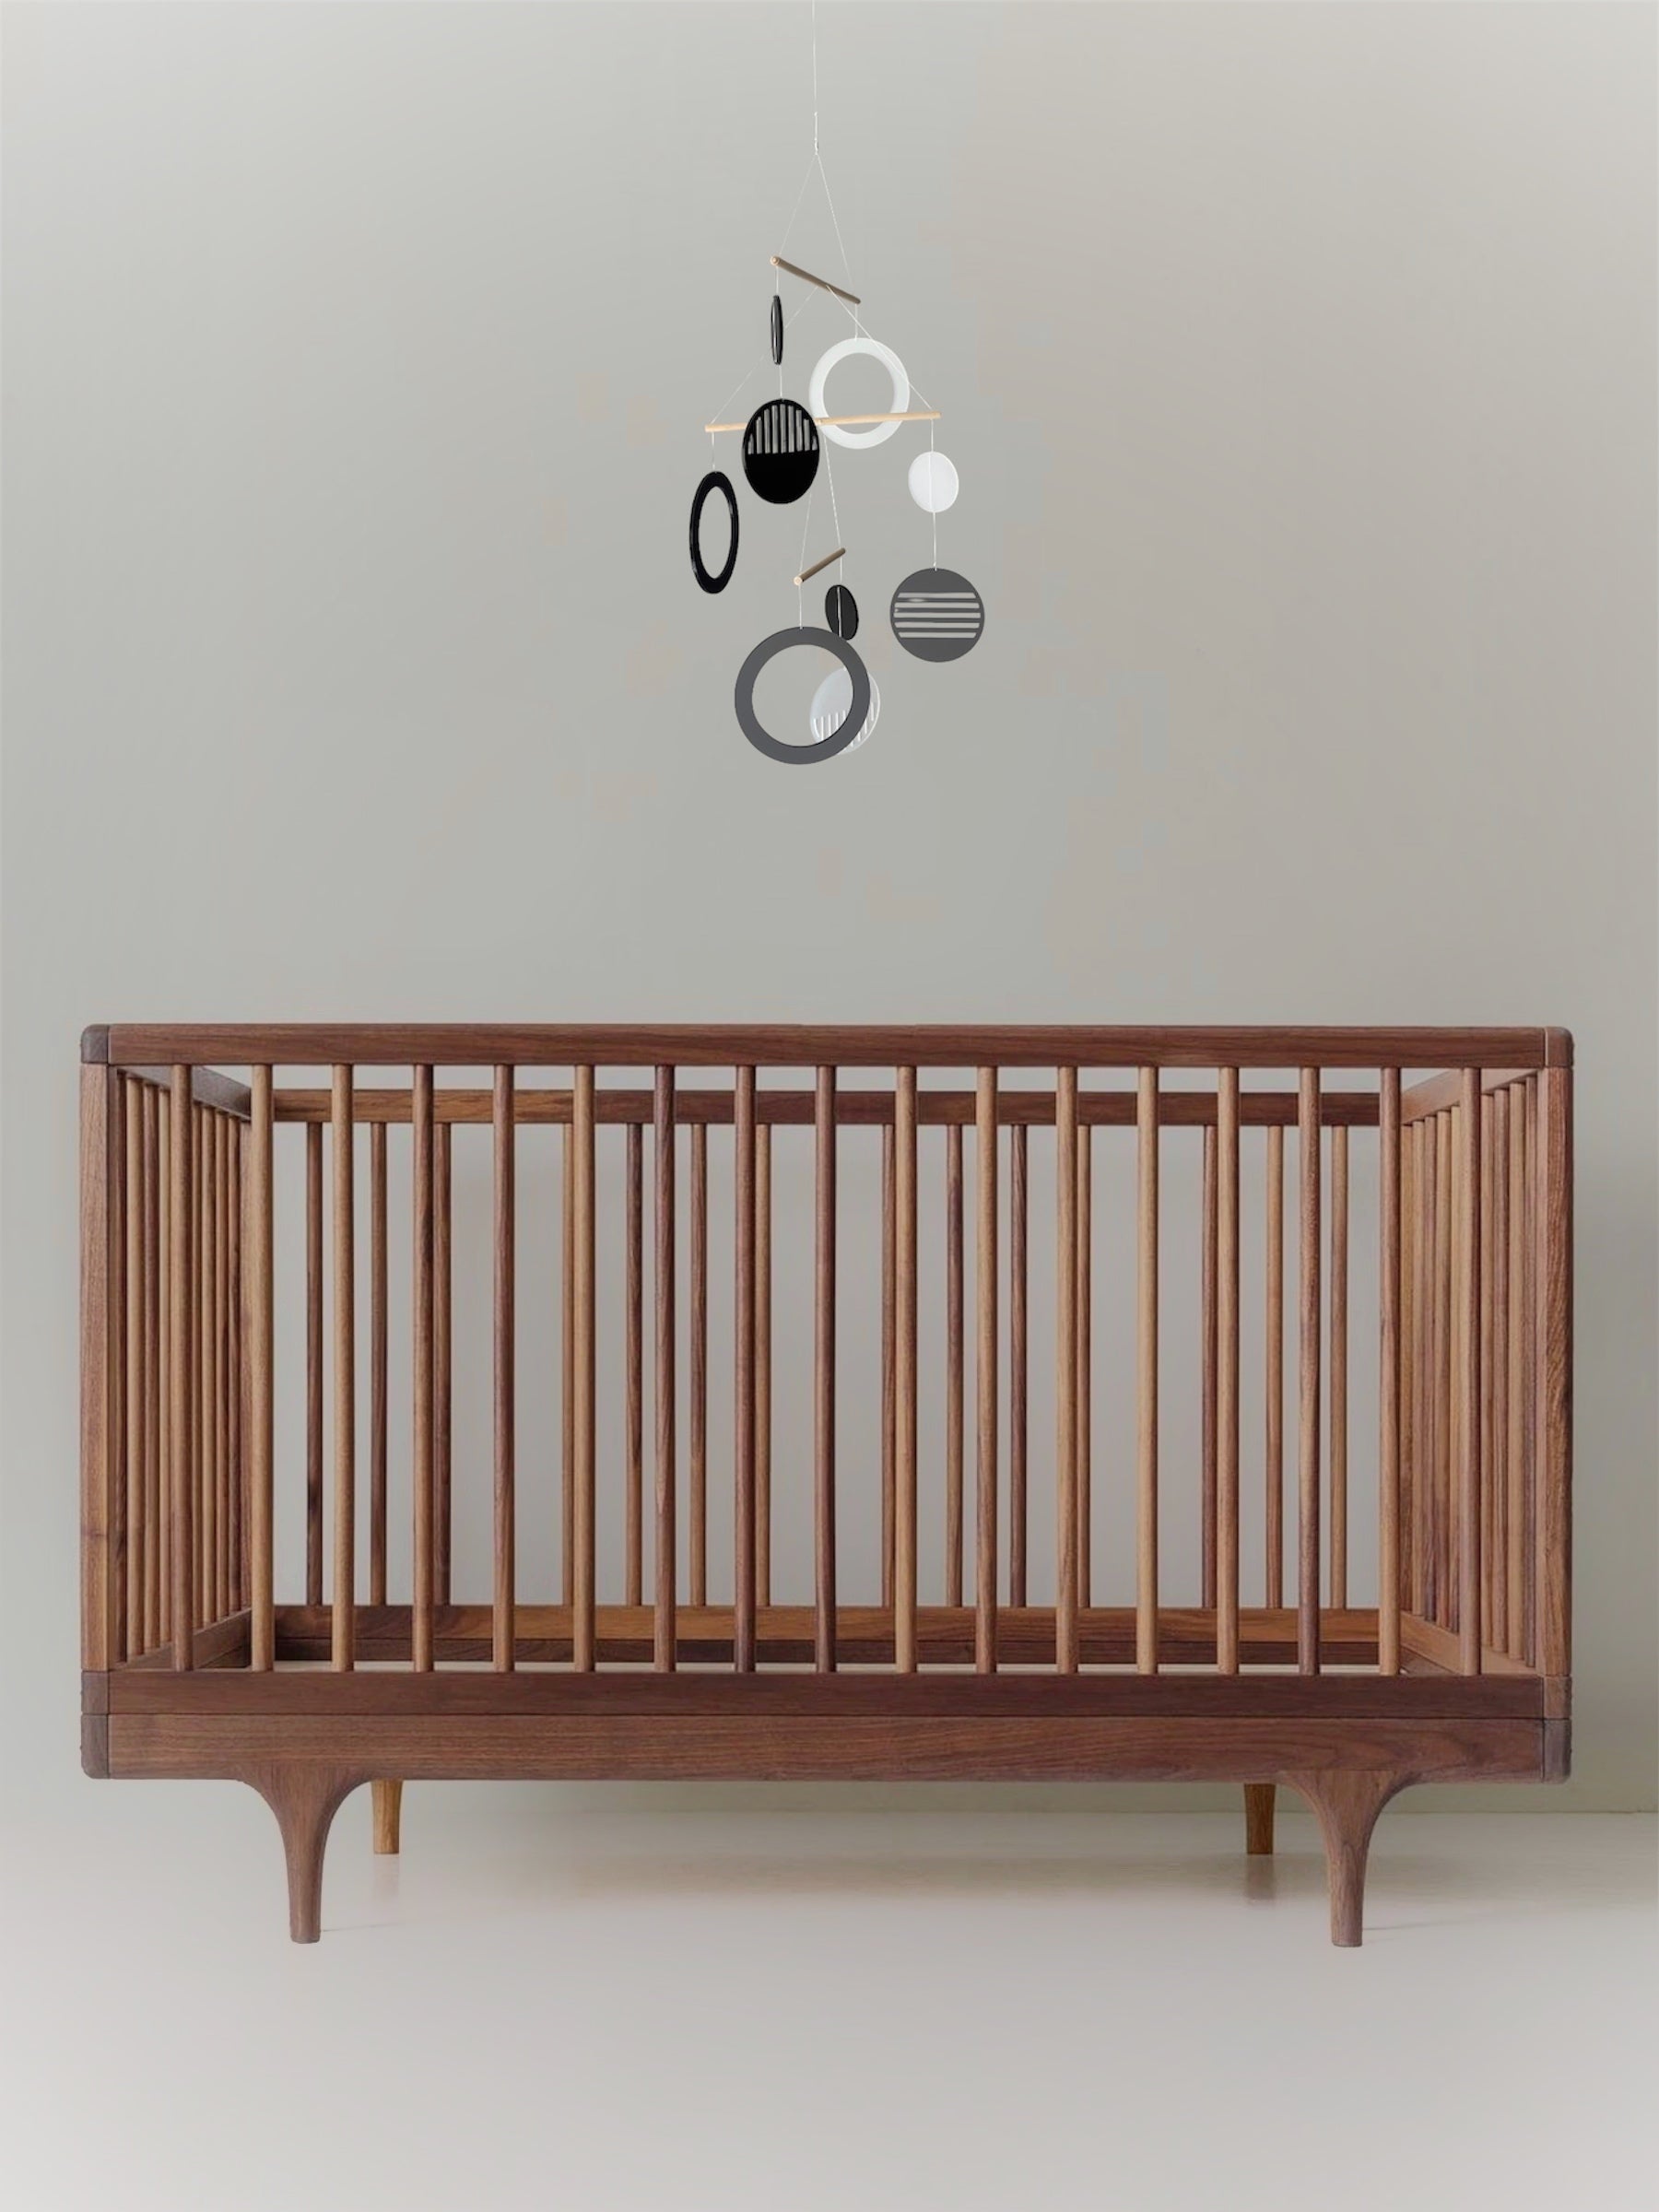 Monochrome baby mobile - Luna The Illuminist - sensory high contrast black  white  - Kinetic Mobile Kinetic Art Sculpture Crib Mobile nursery Mobile Nursery Mobile Art Mid Century Art  Mid Century modern mobiles for adults furniture and decor Hanging